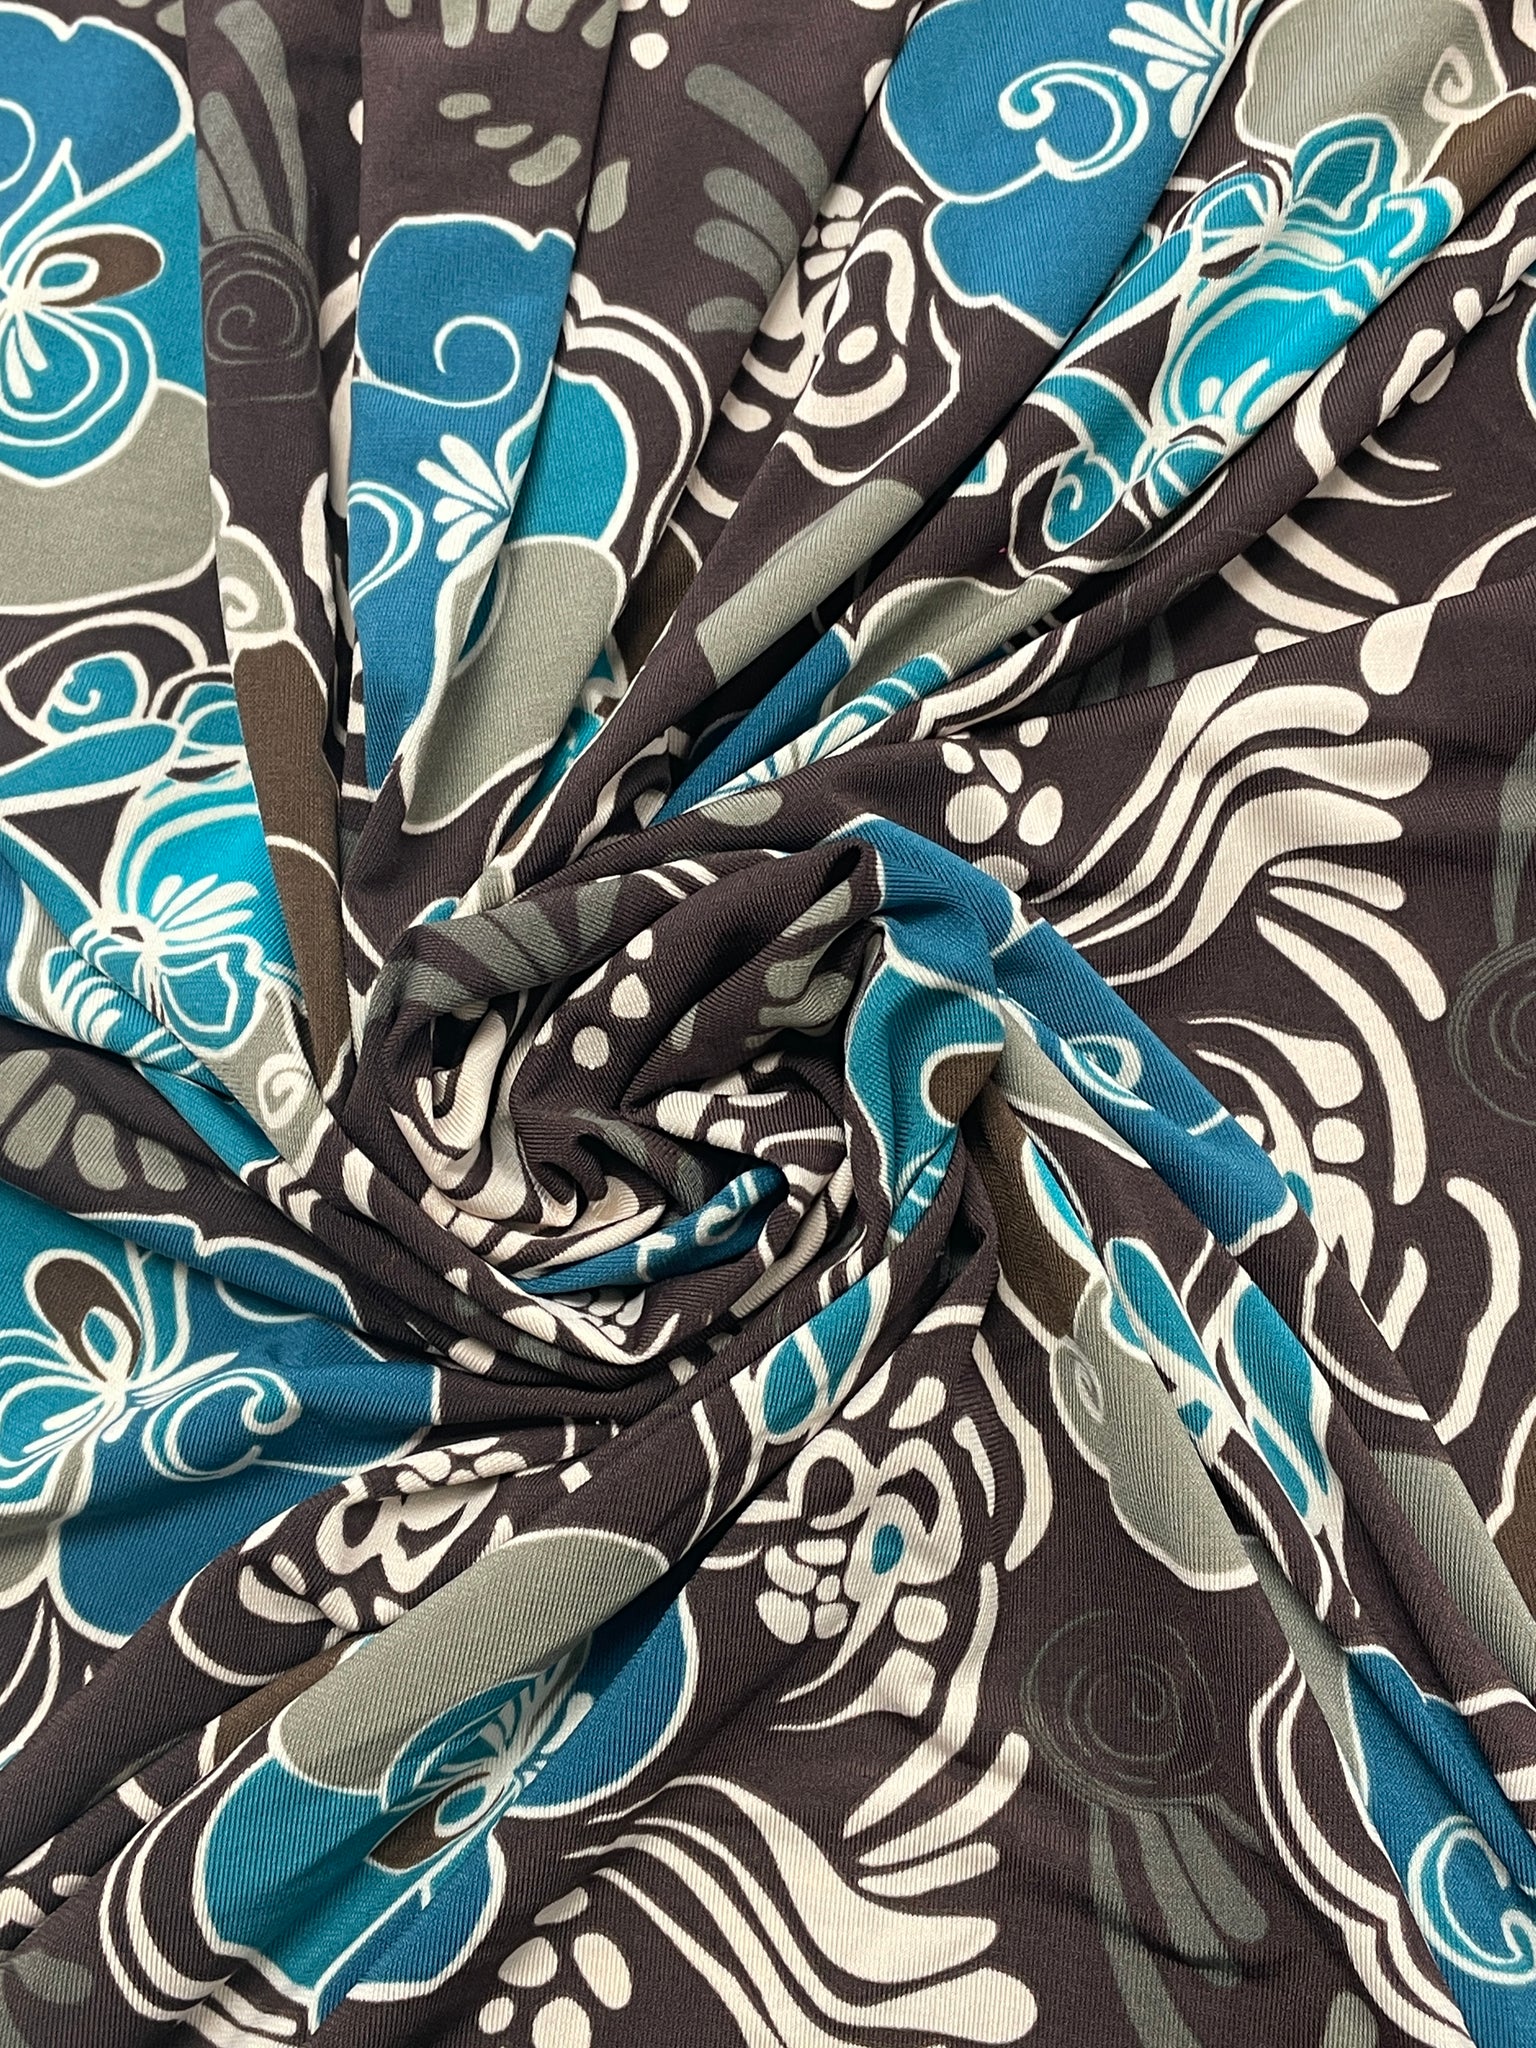 2 7/8 YD Polyester Blend Knit - Dark Brown with Turquoise Flowers